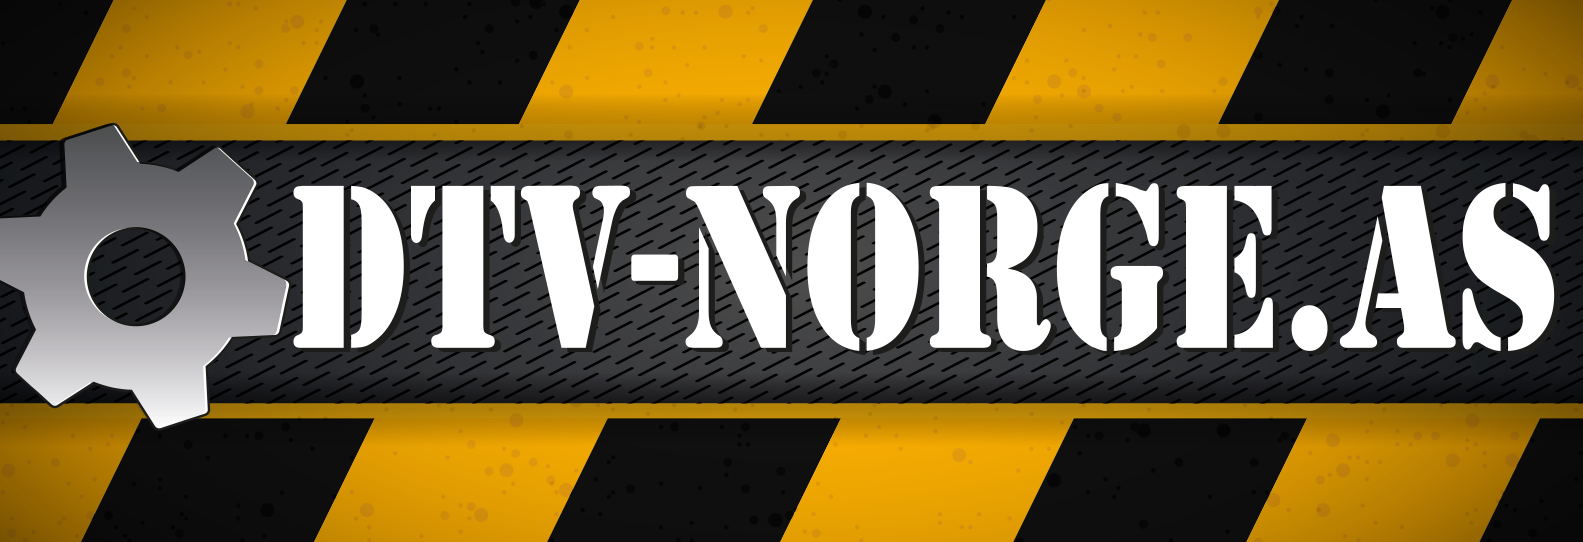 http://dtv-norge.g5.nsn.no